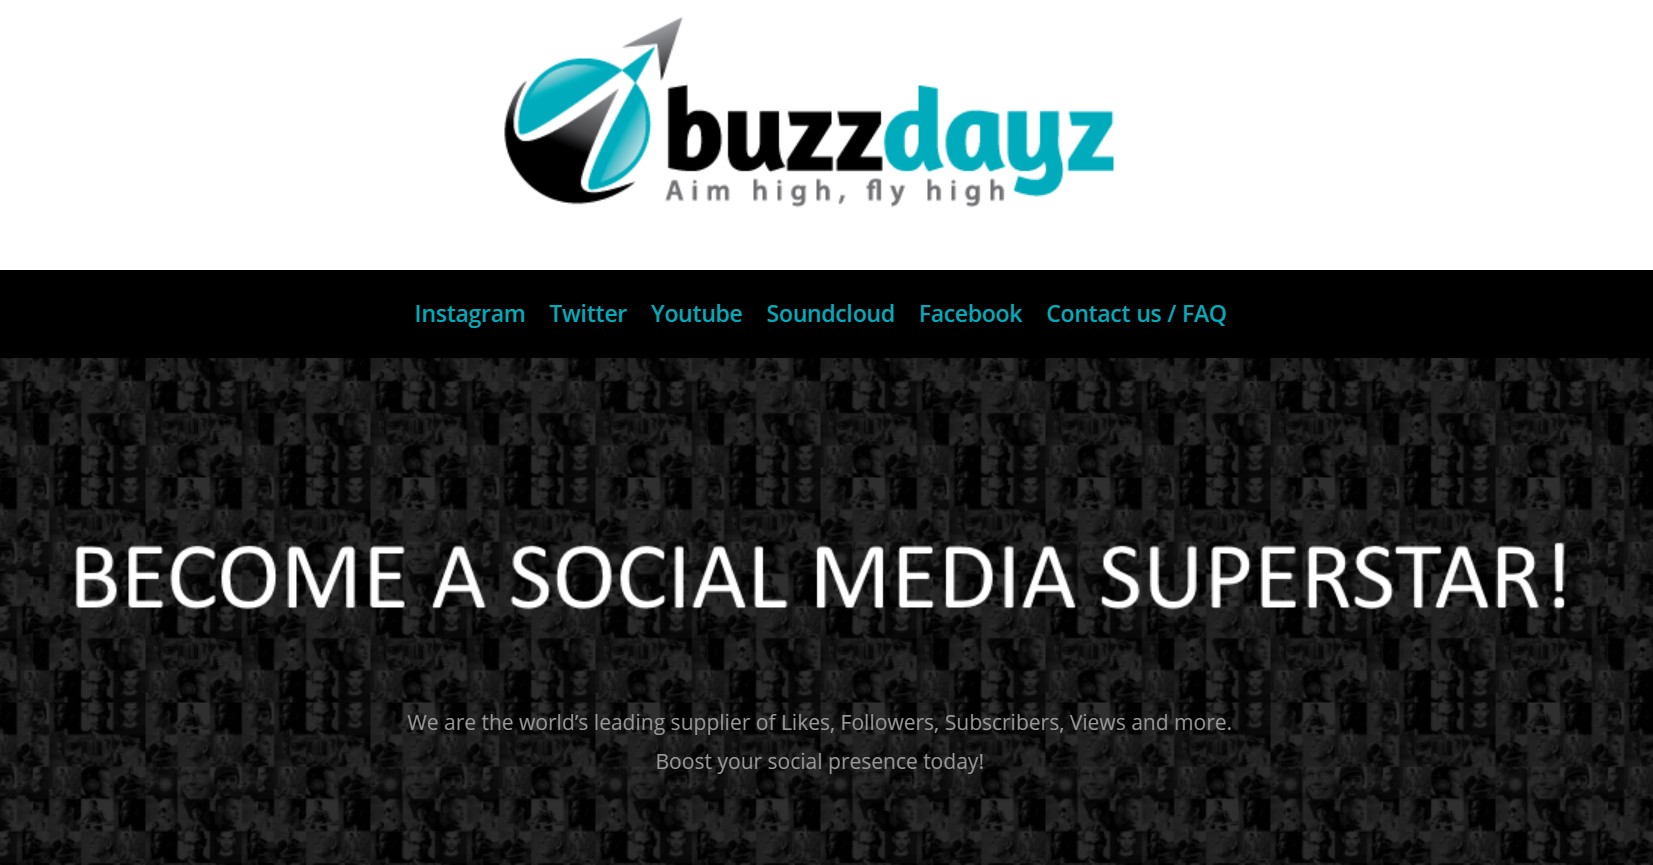 BuzzDayz Review: Is It Safe & Legit, or a Scam?